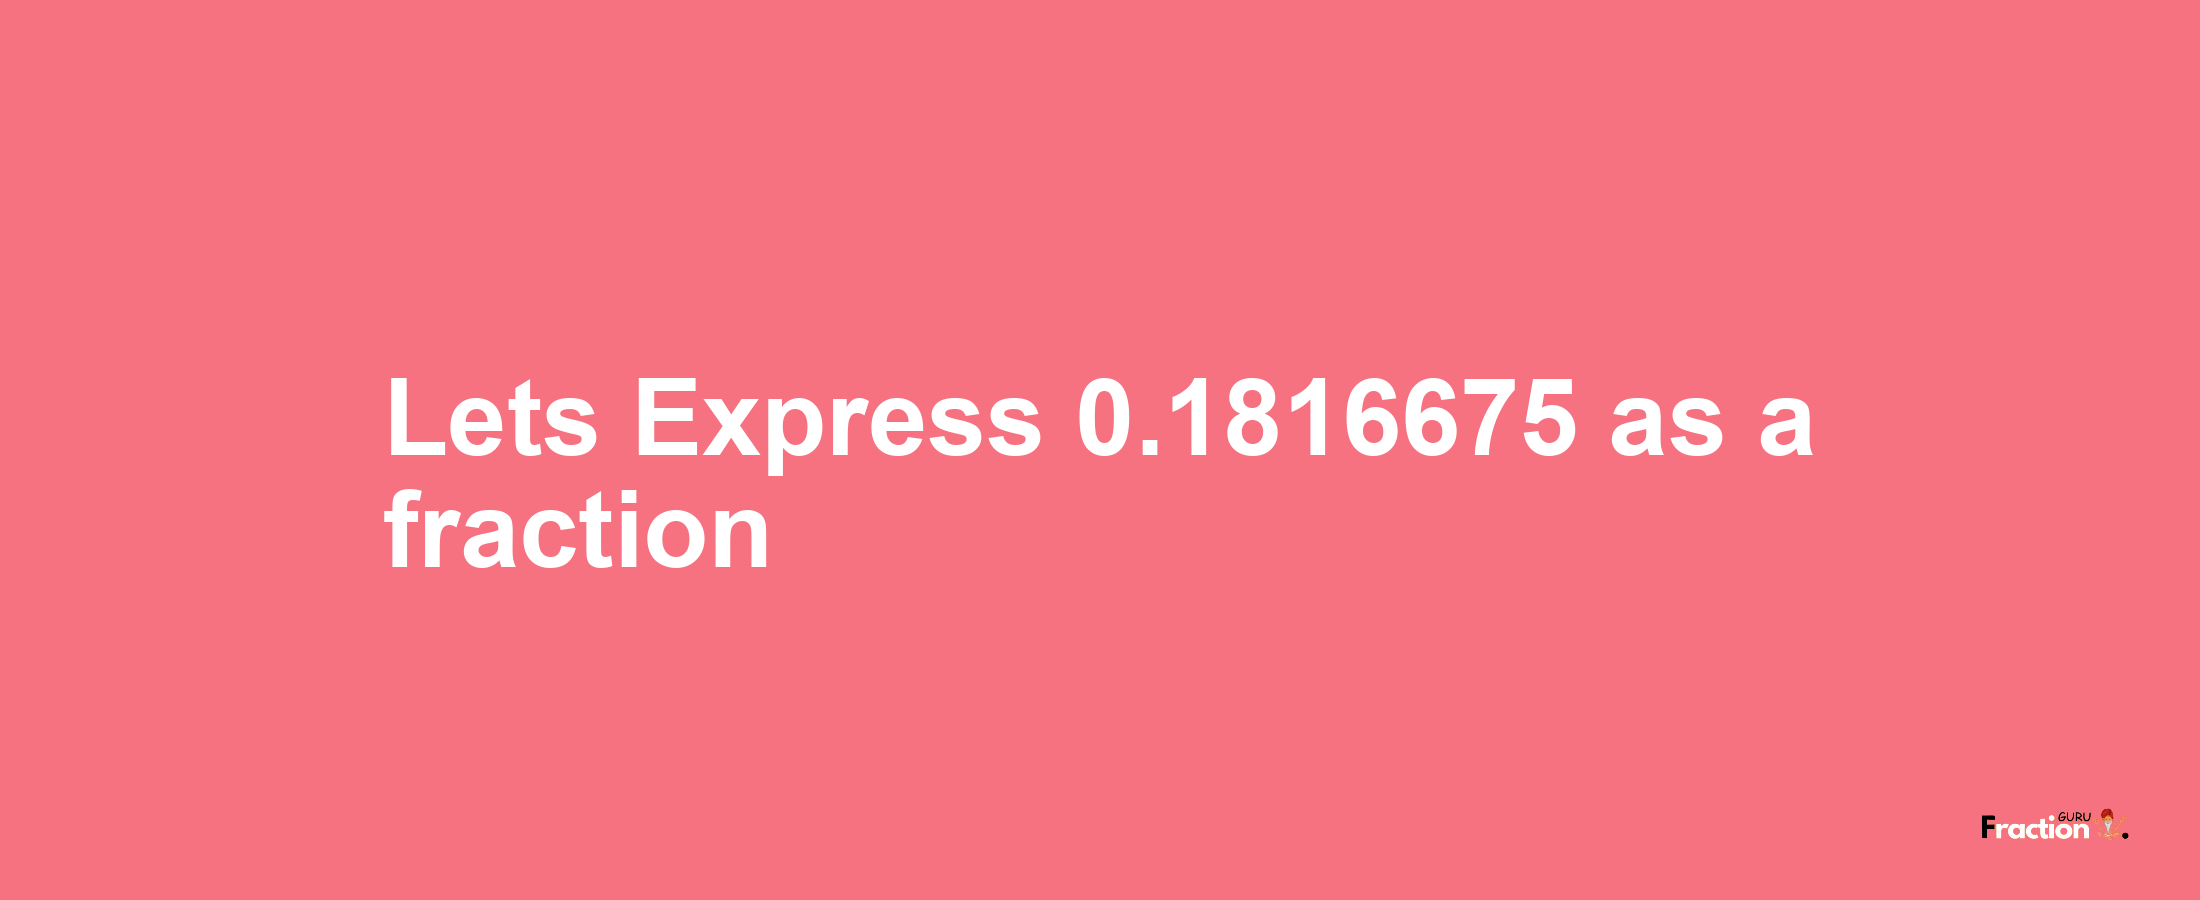 Lets Express 0.1816675 as afraction